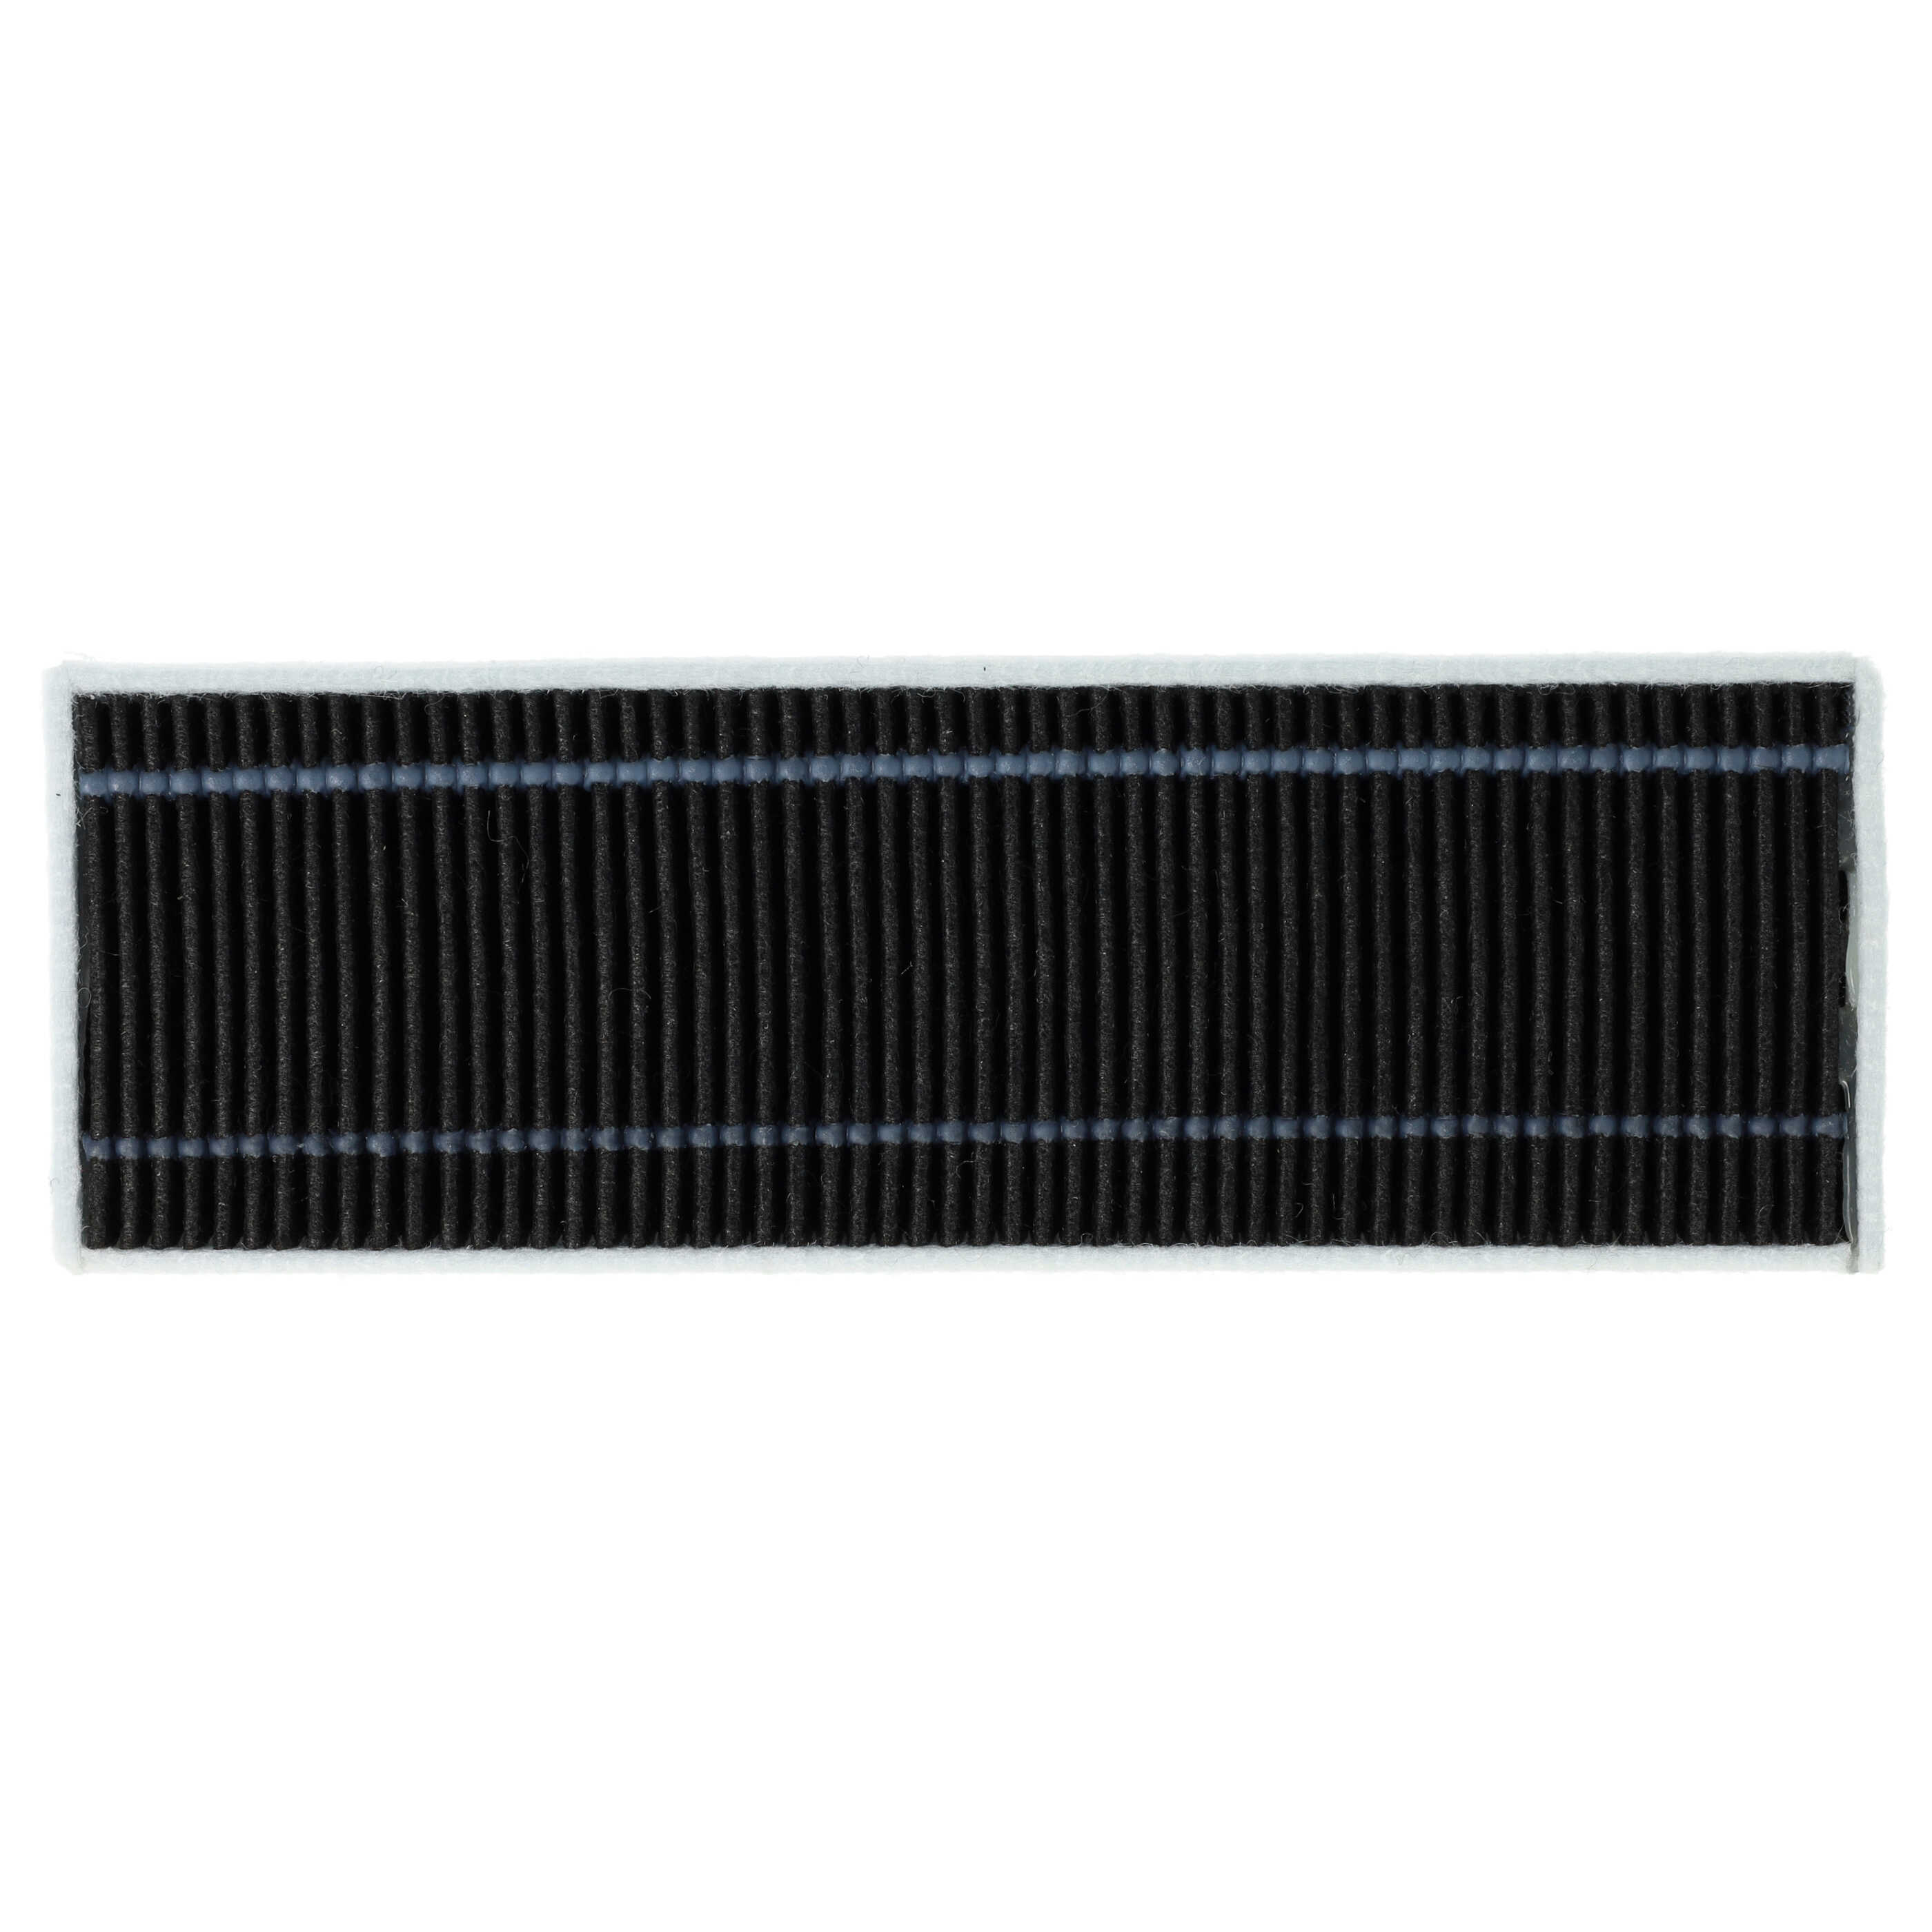 5x Active Carbon Filter suitable for M7 Proscenic, Cecotec, Xiaomi M7 Robot and Others - 13 x 4 x 1 cm